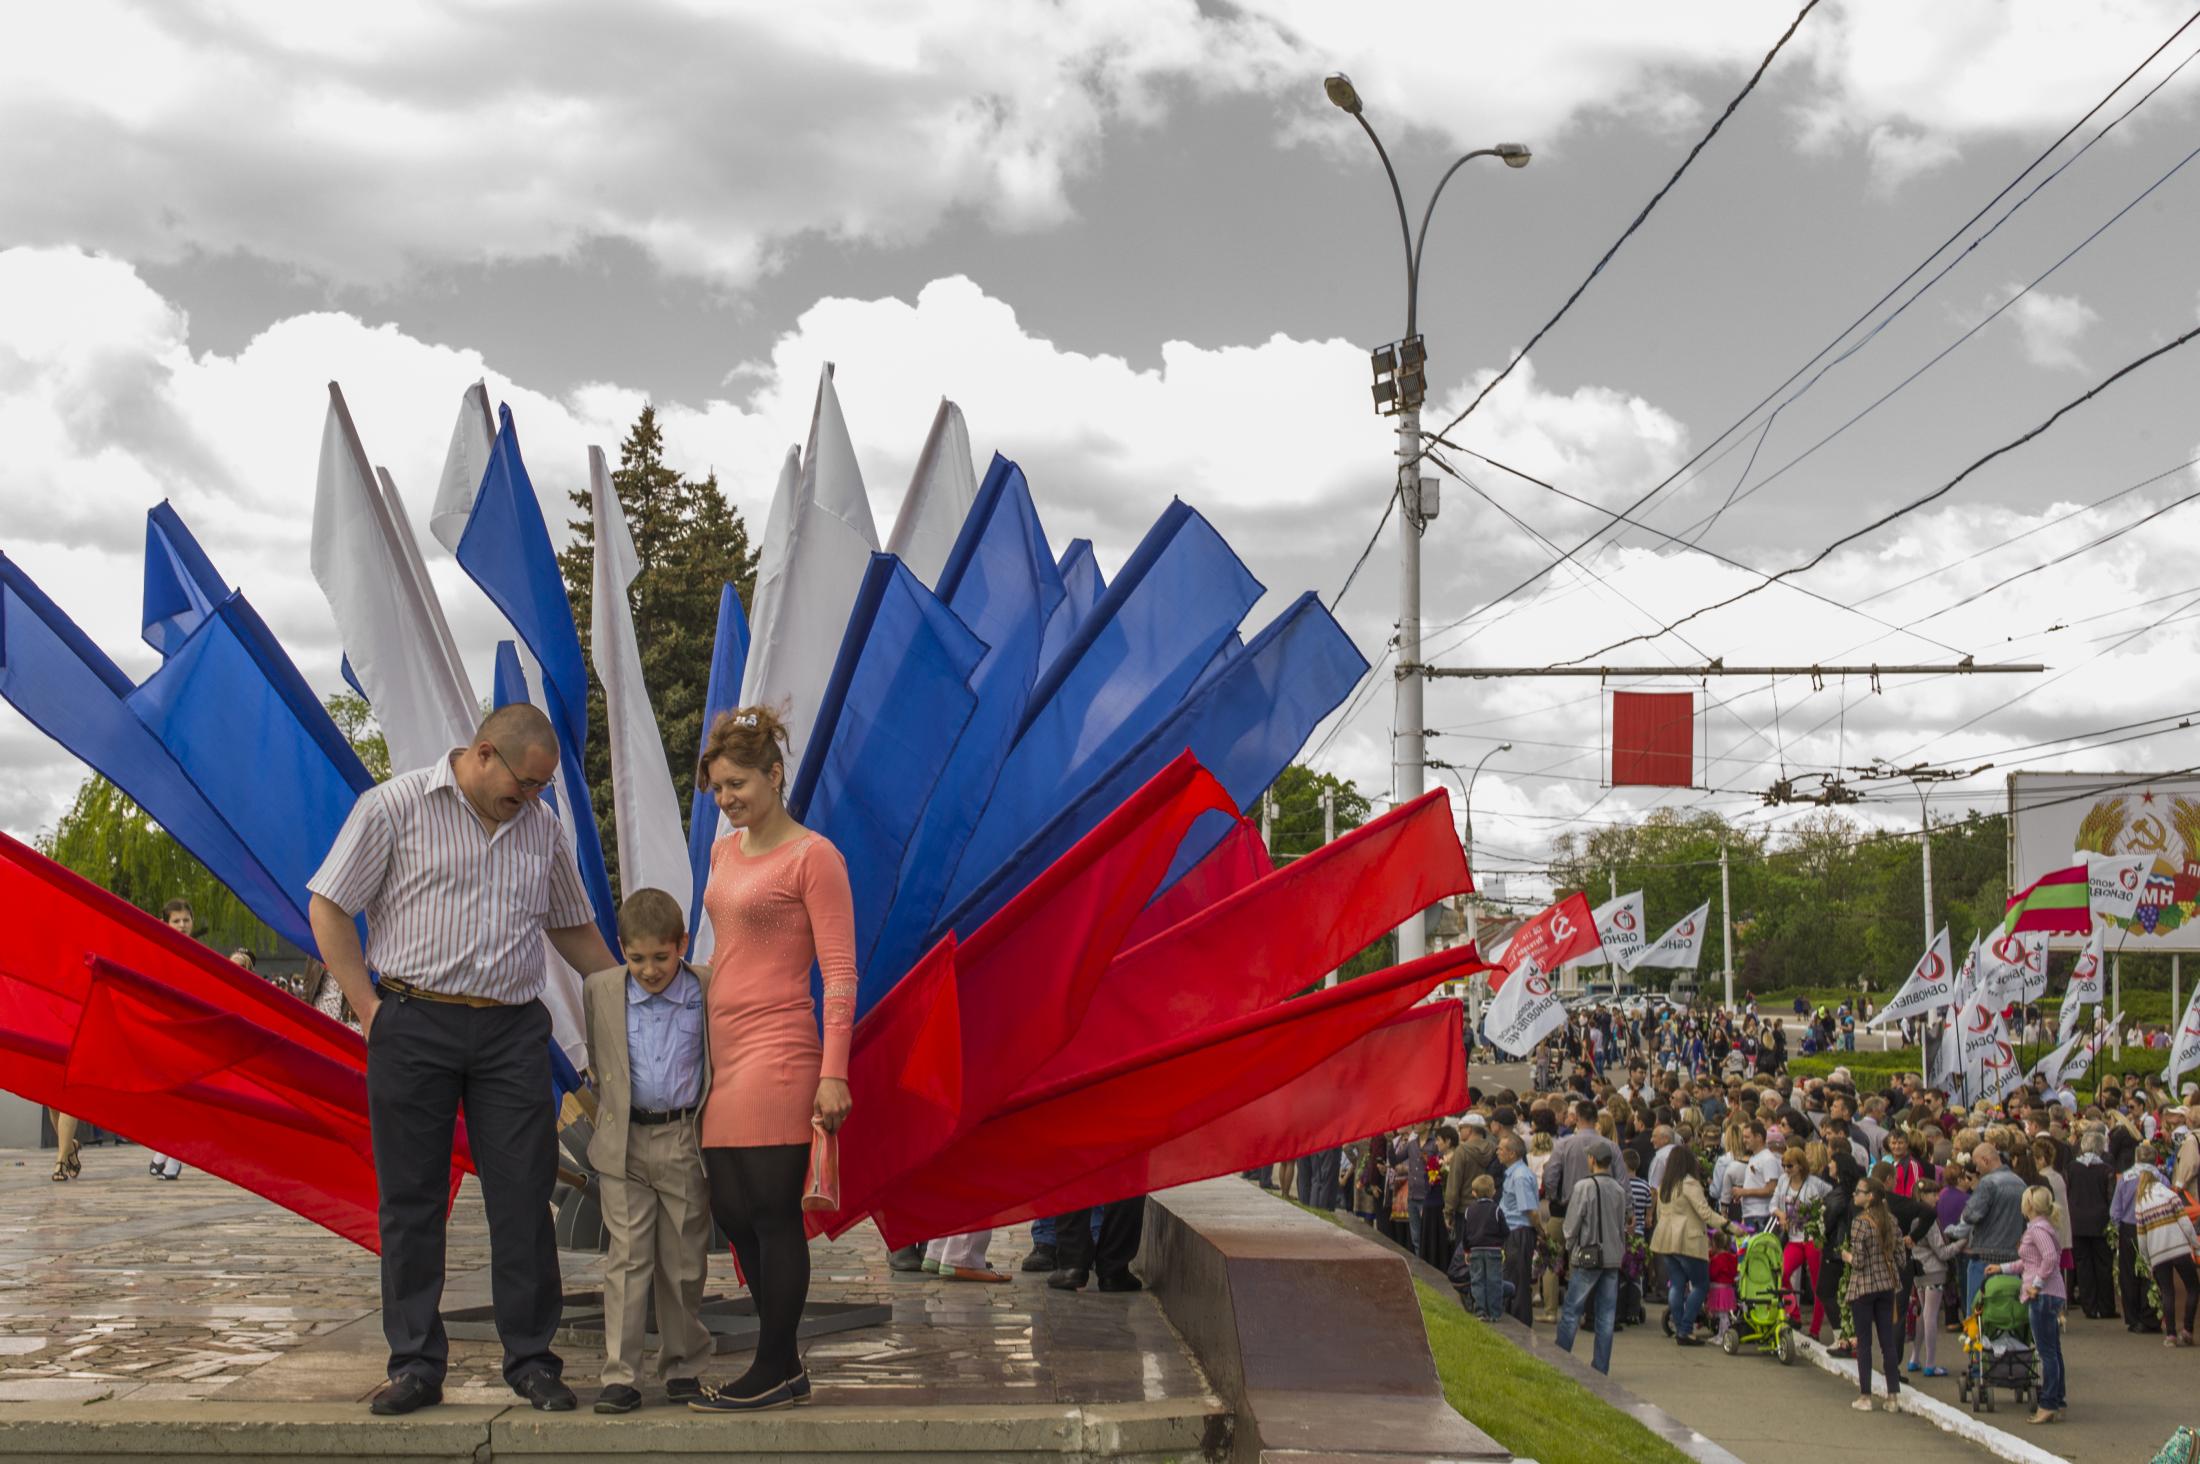  A family stands for a picture in front of a decoration made of flags with the Russian...